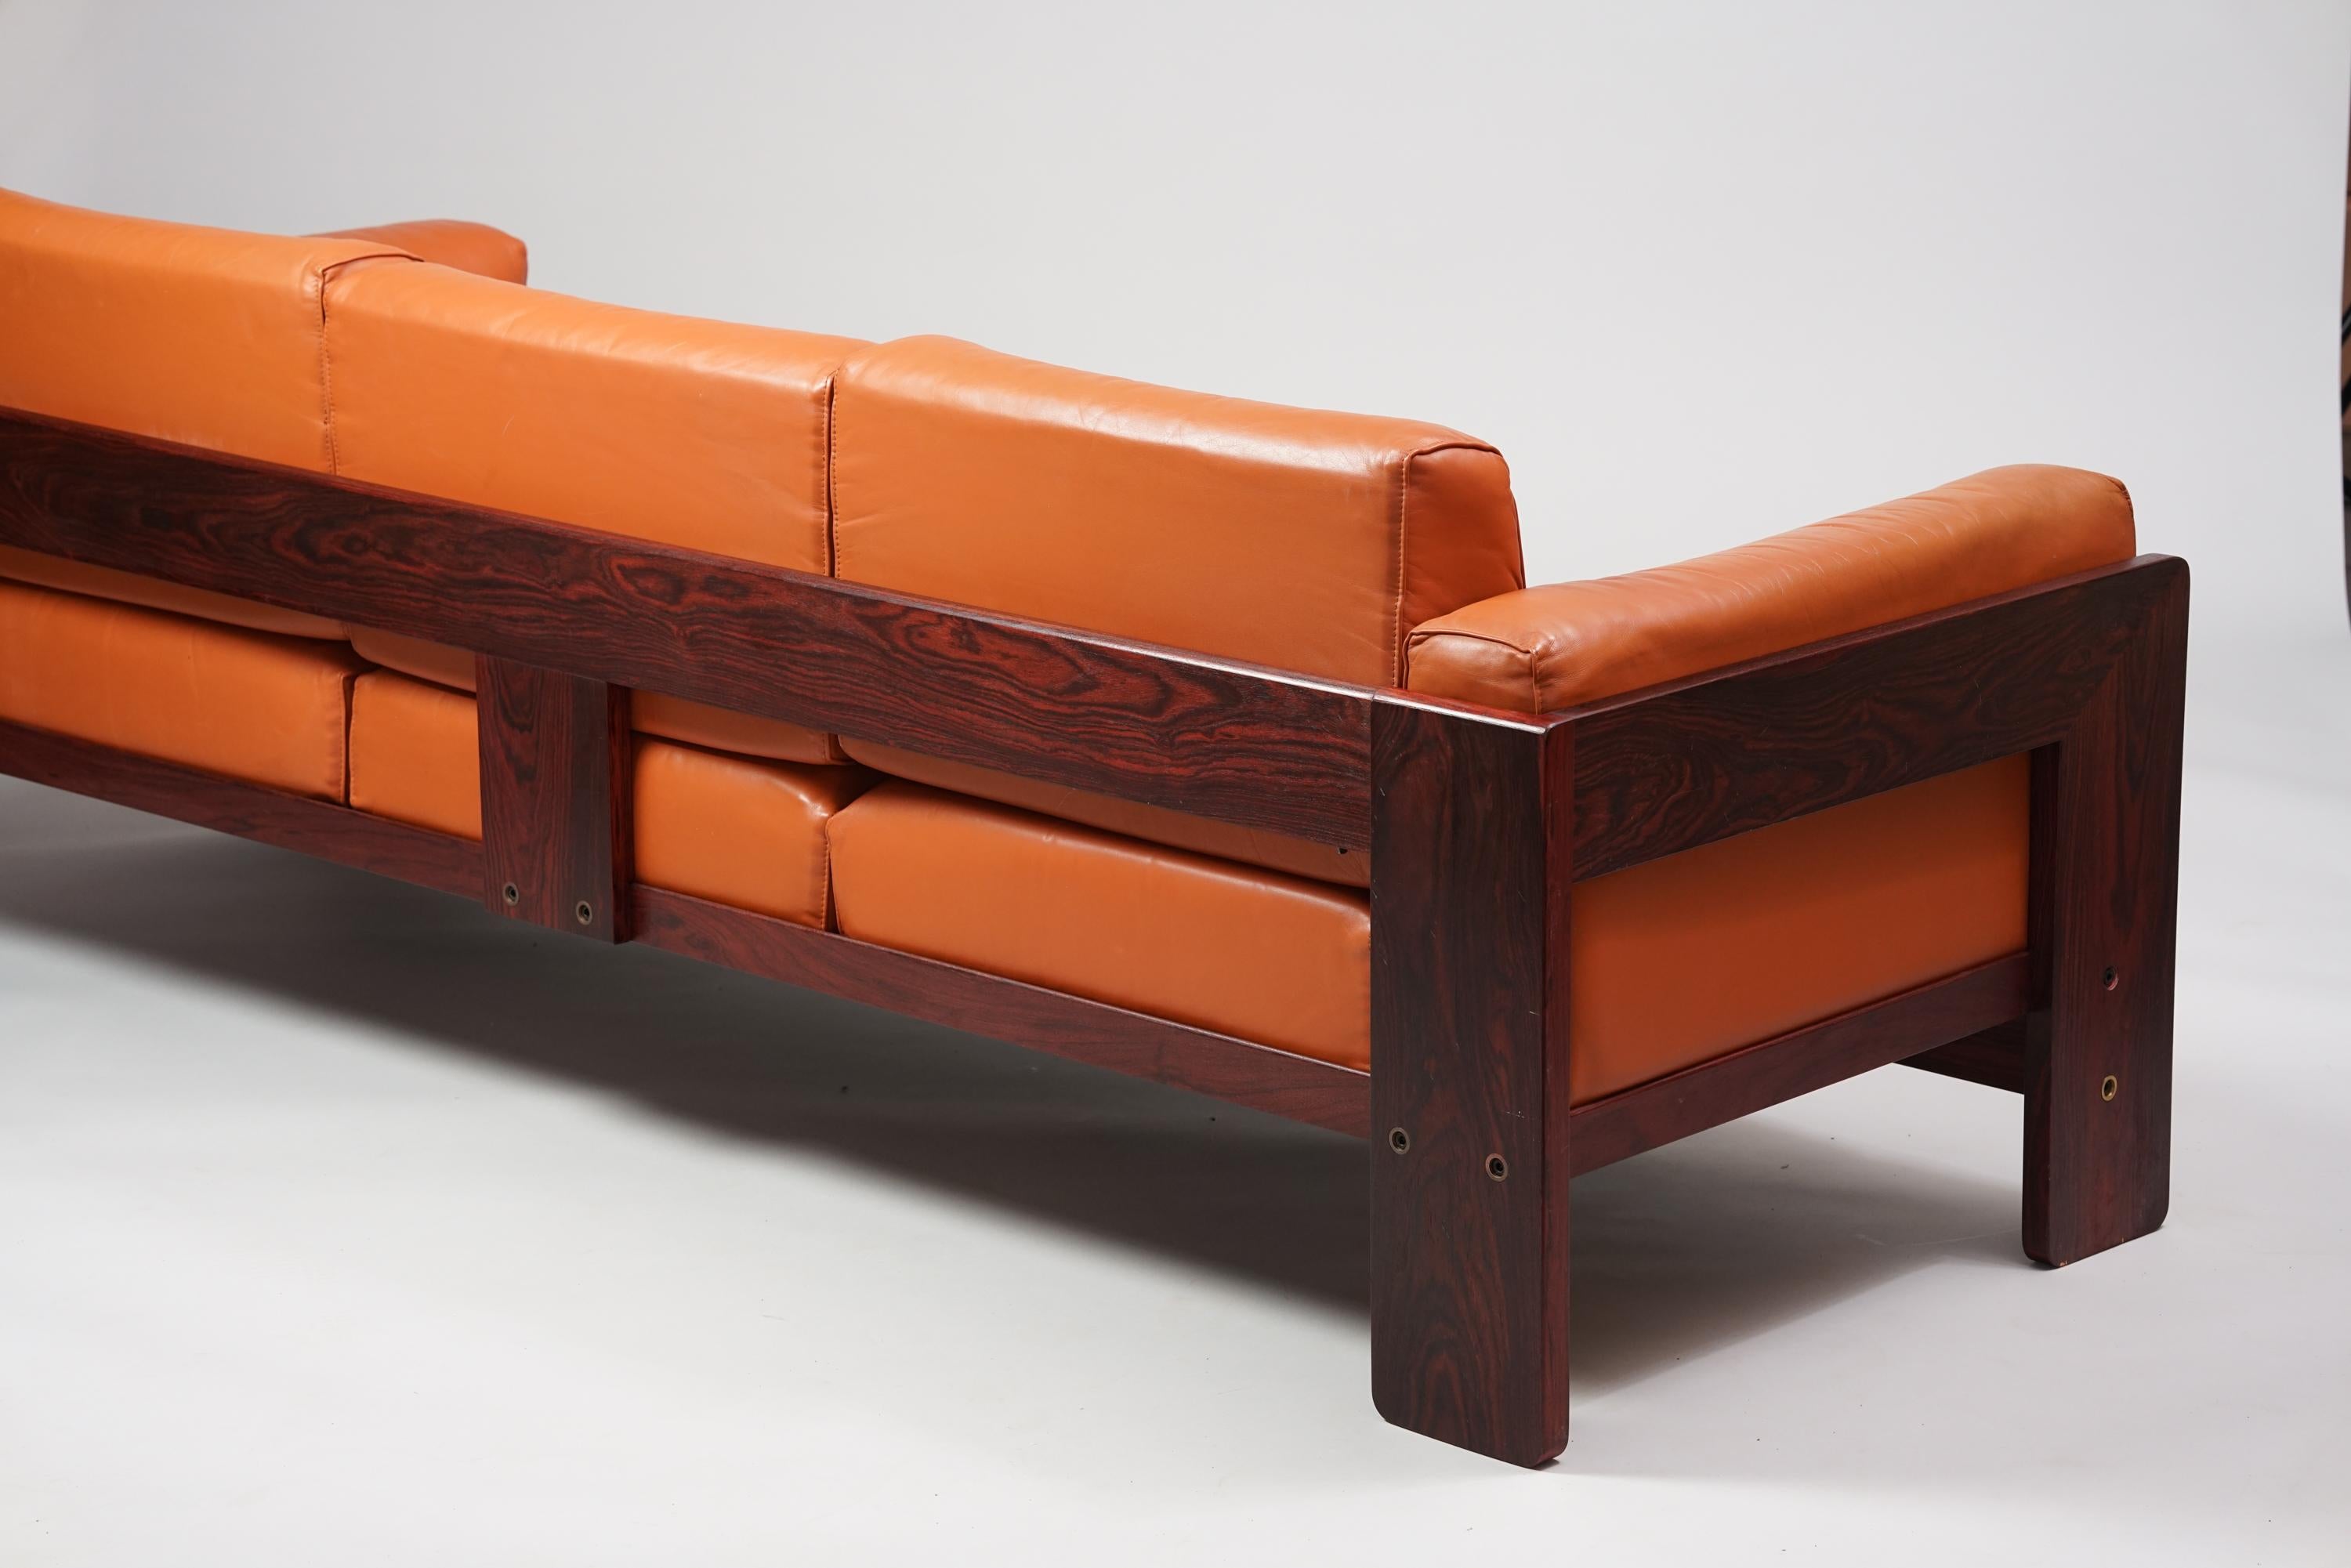 Mid-20th Century Bastiano Sofa in Leather by Tobia Scarpa for Haimi Finland, 1960s